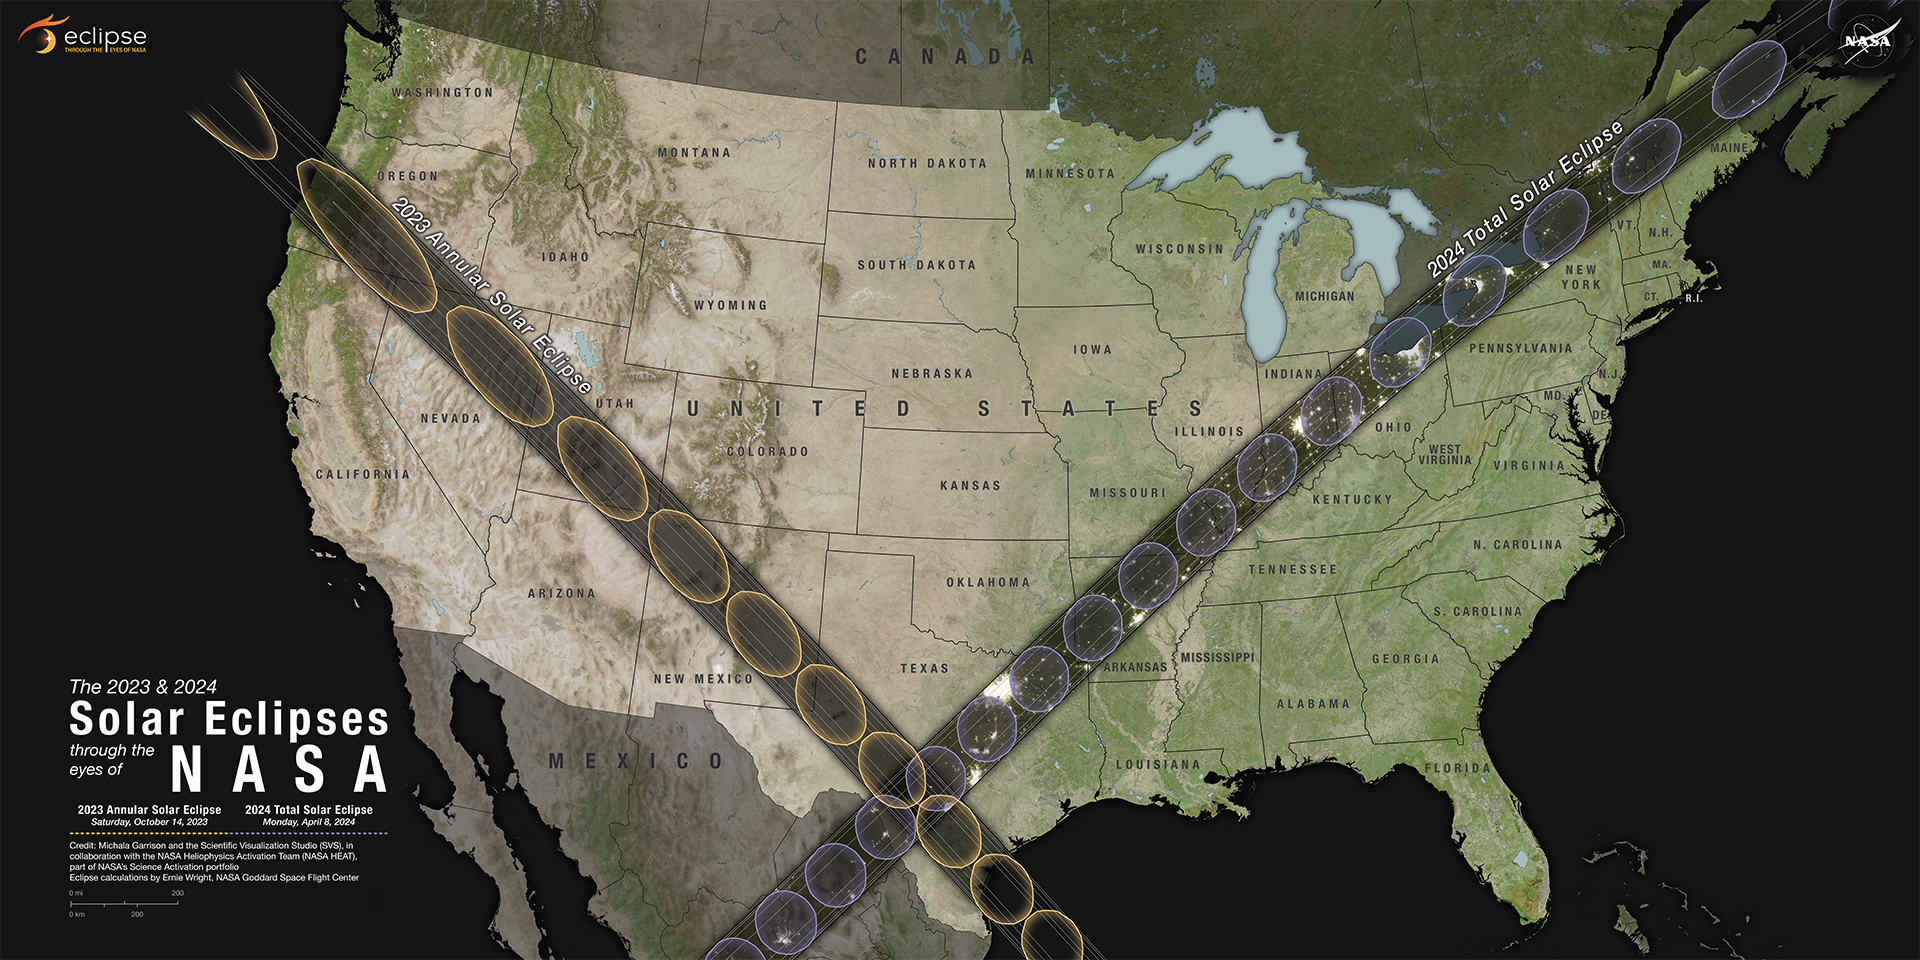 An image centered on the United States, with crossing eclipse paths labeled. One, with yellow circles, shows the path of the annular eclipse in 2023, crossing from Oregon to Texas. The other, with blue circles, shows the path of the total solar eclipse in 2024, crossing from Texas to Maine..